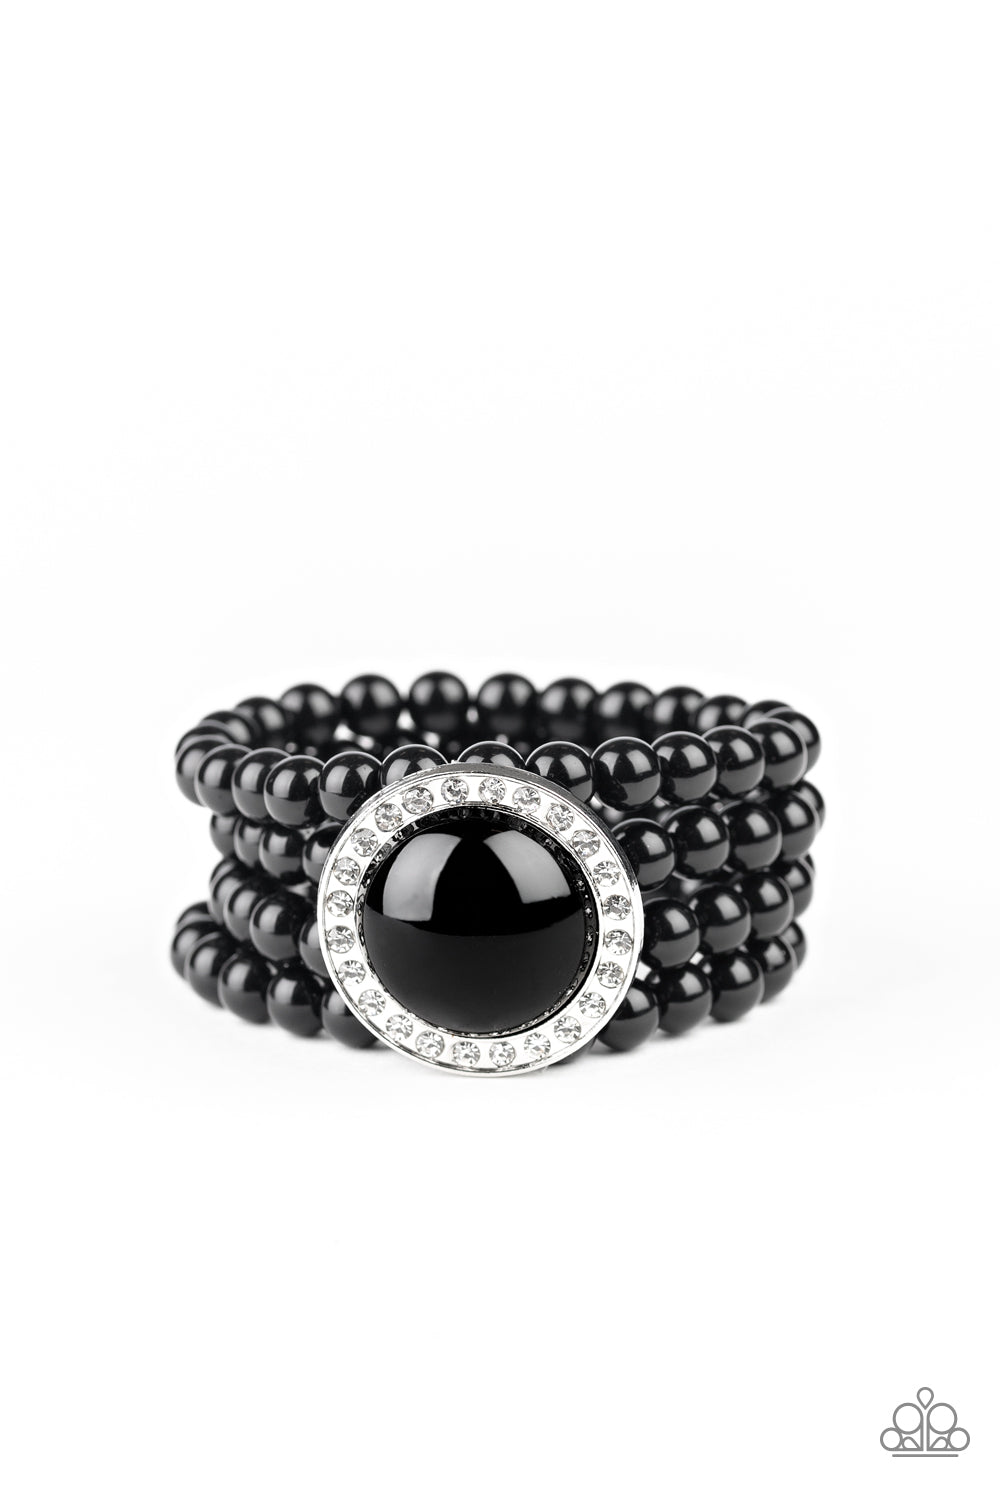 Threaded along stretchy bands, row after row of black beads are held in place by an exaggerated black beaded frame encrusted in glassy white rhinestones for a refined finish.